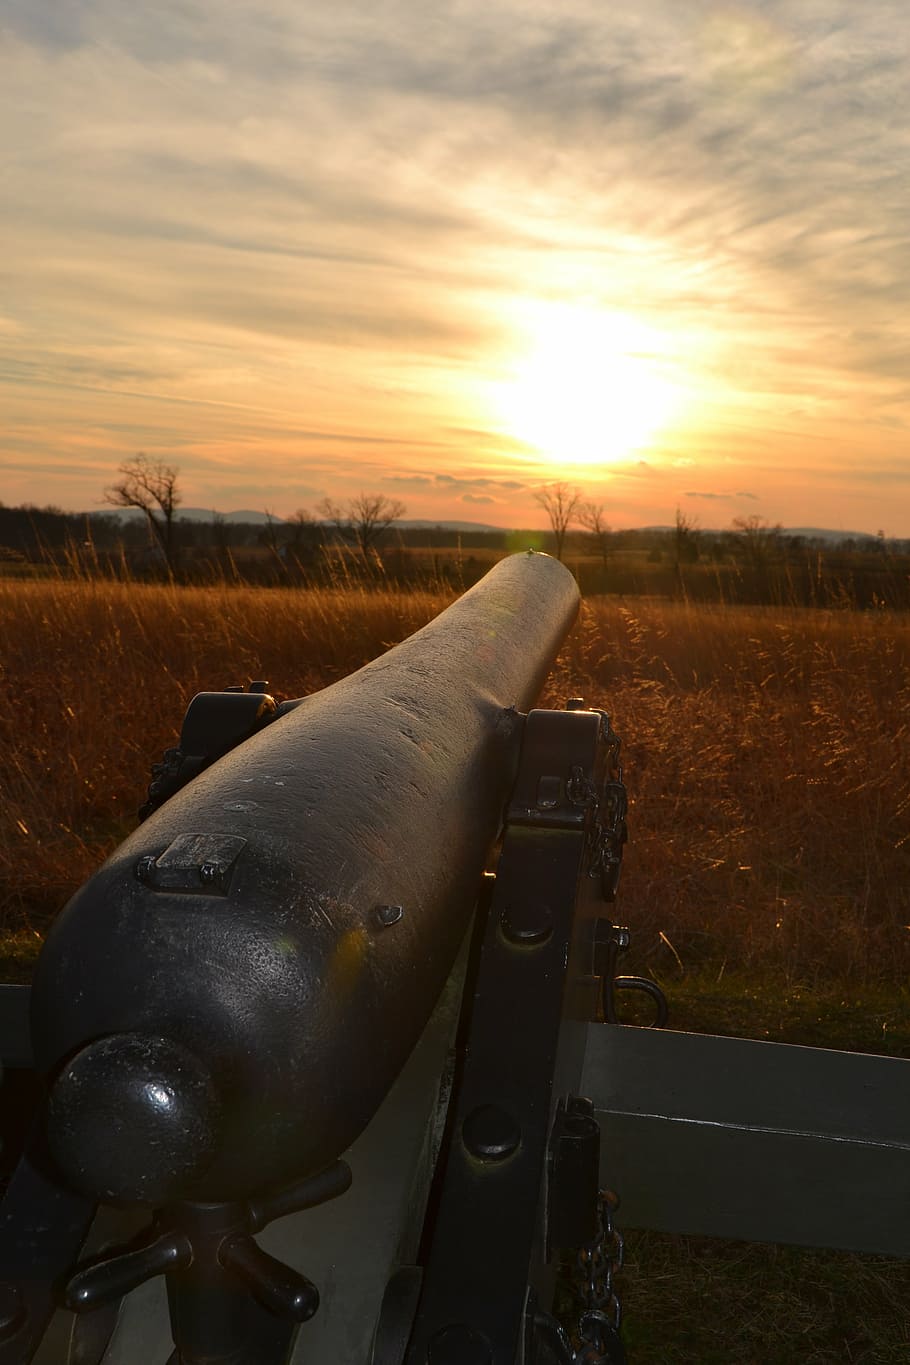 battlefield, cannon, g, war, military, history, weapon, historical